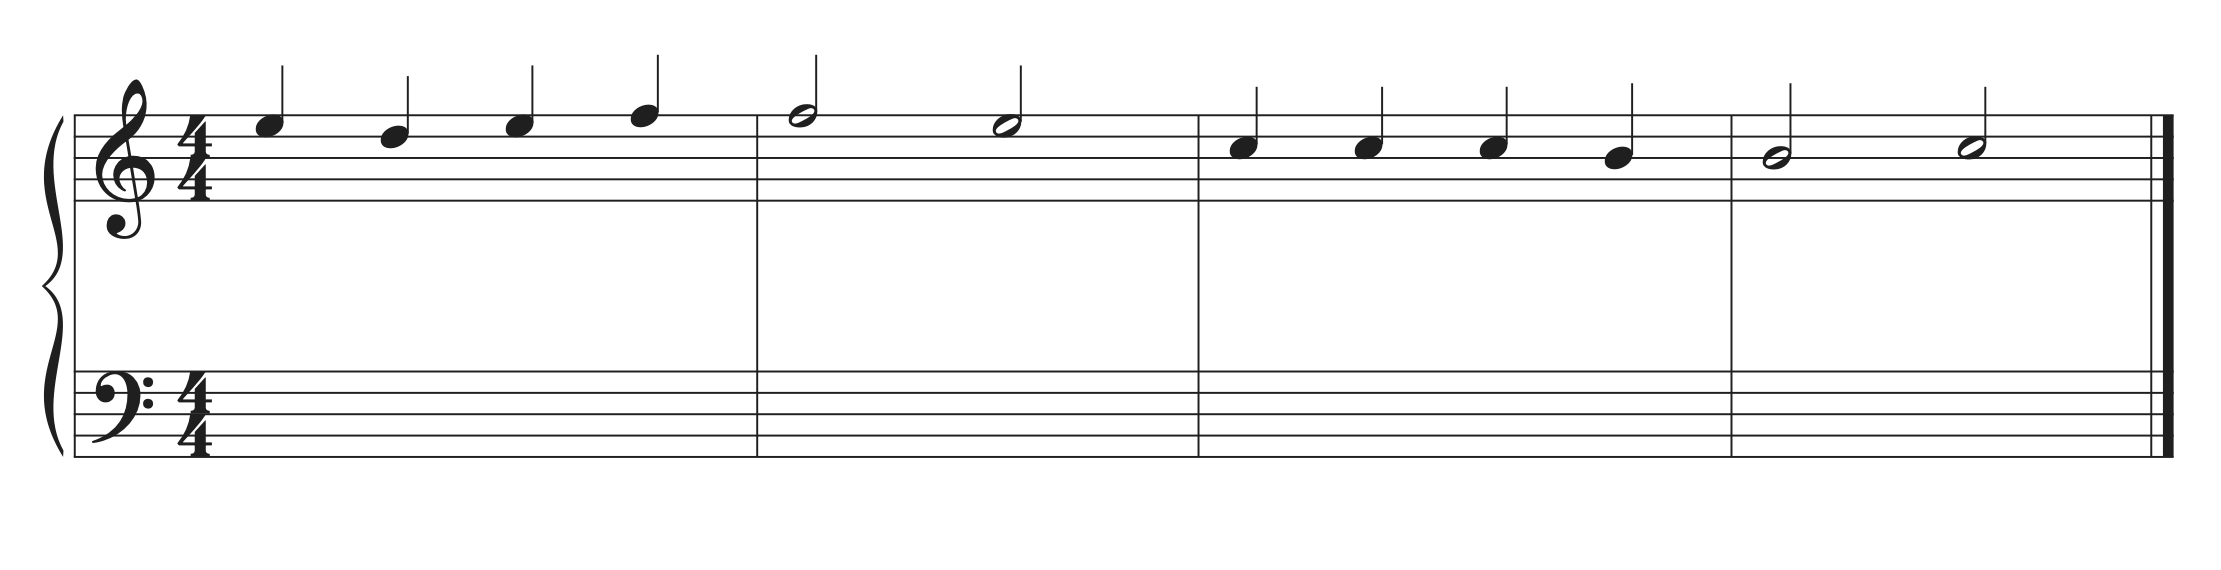 A four-bar musical example in C major with notes E5, D5, E5, F5, F5, E5, C5, C5, C5, B4, B4, C5.